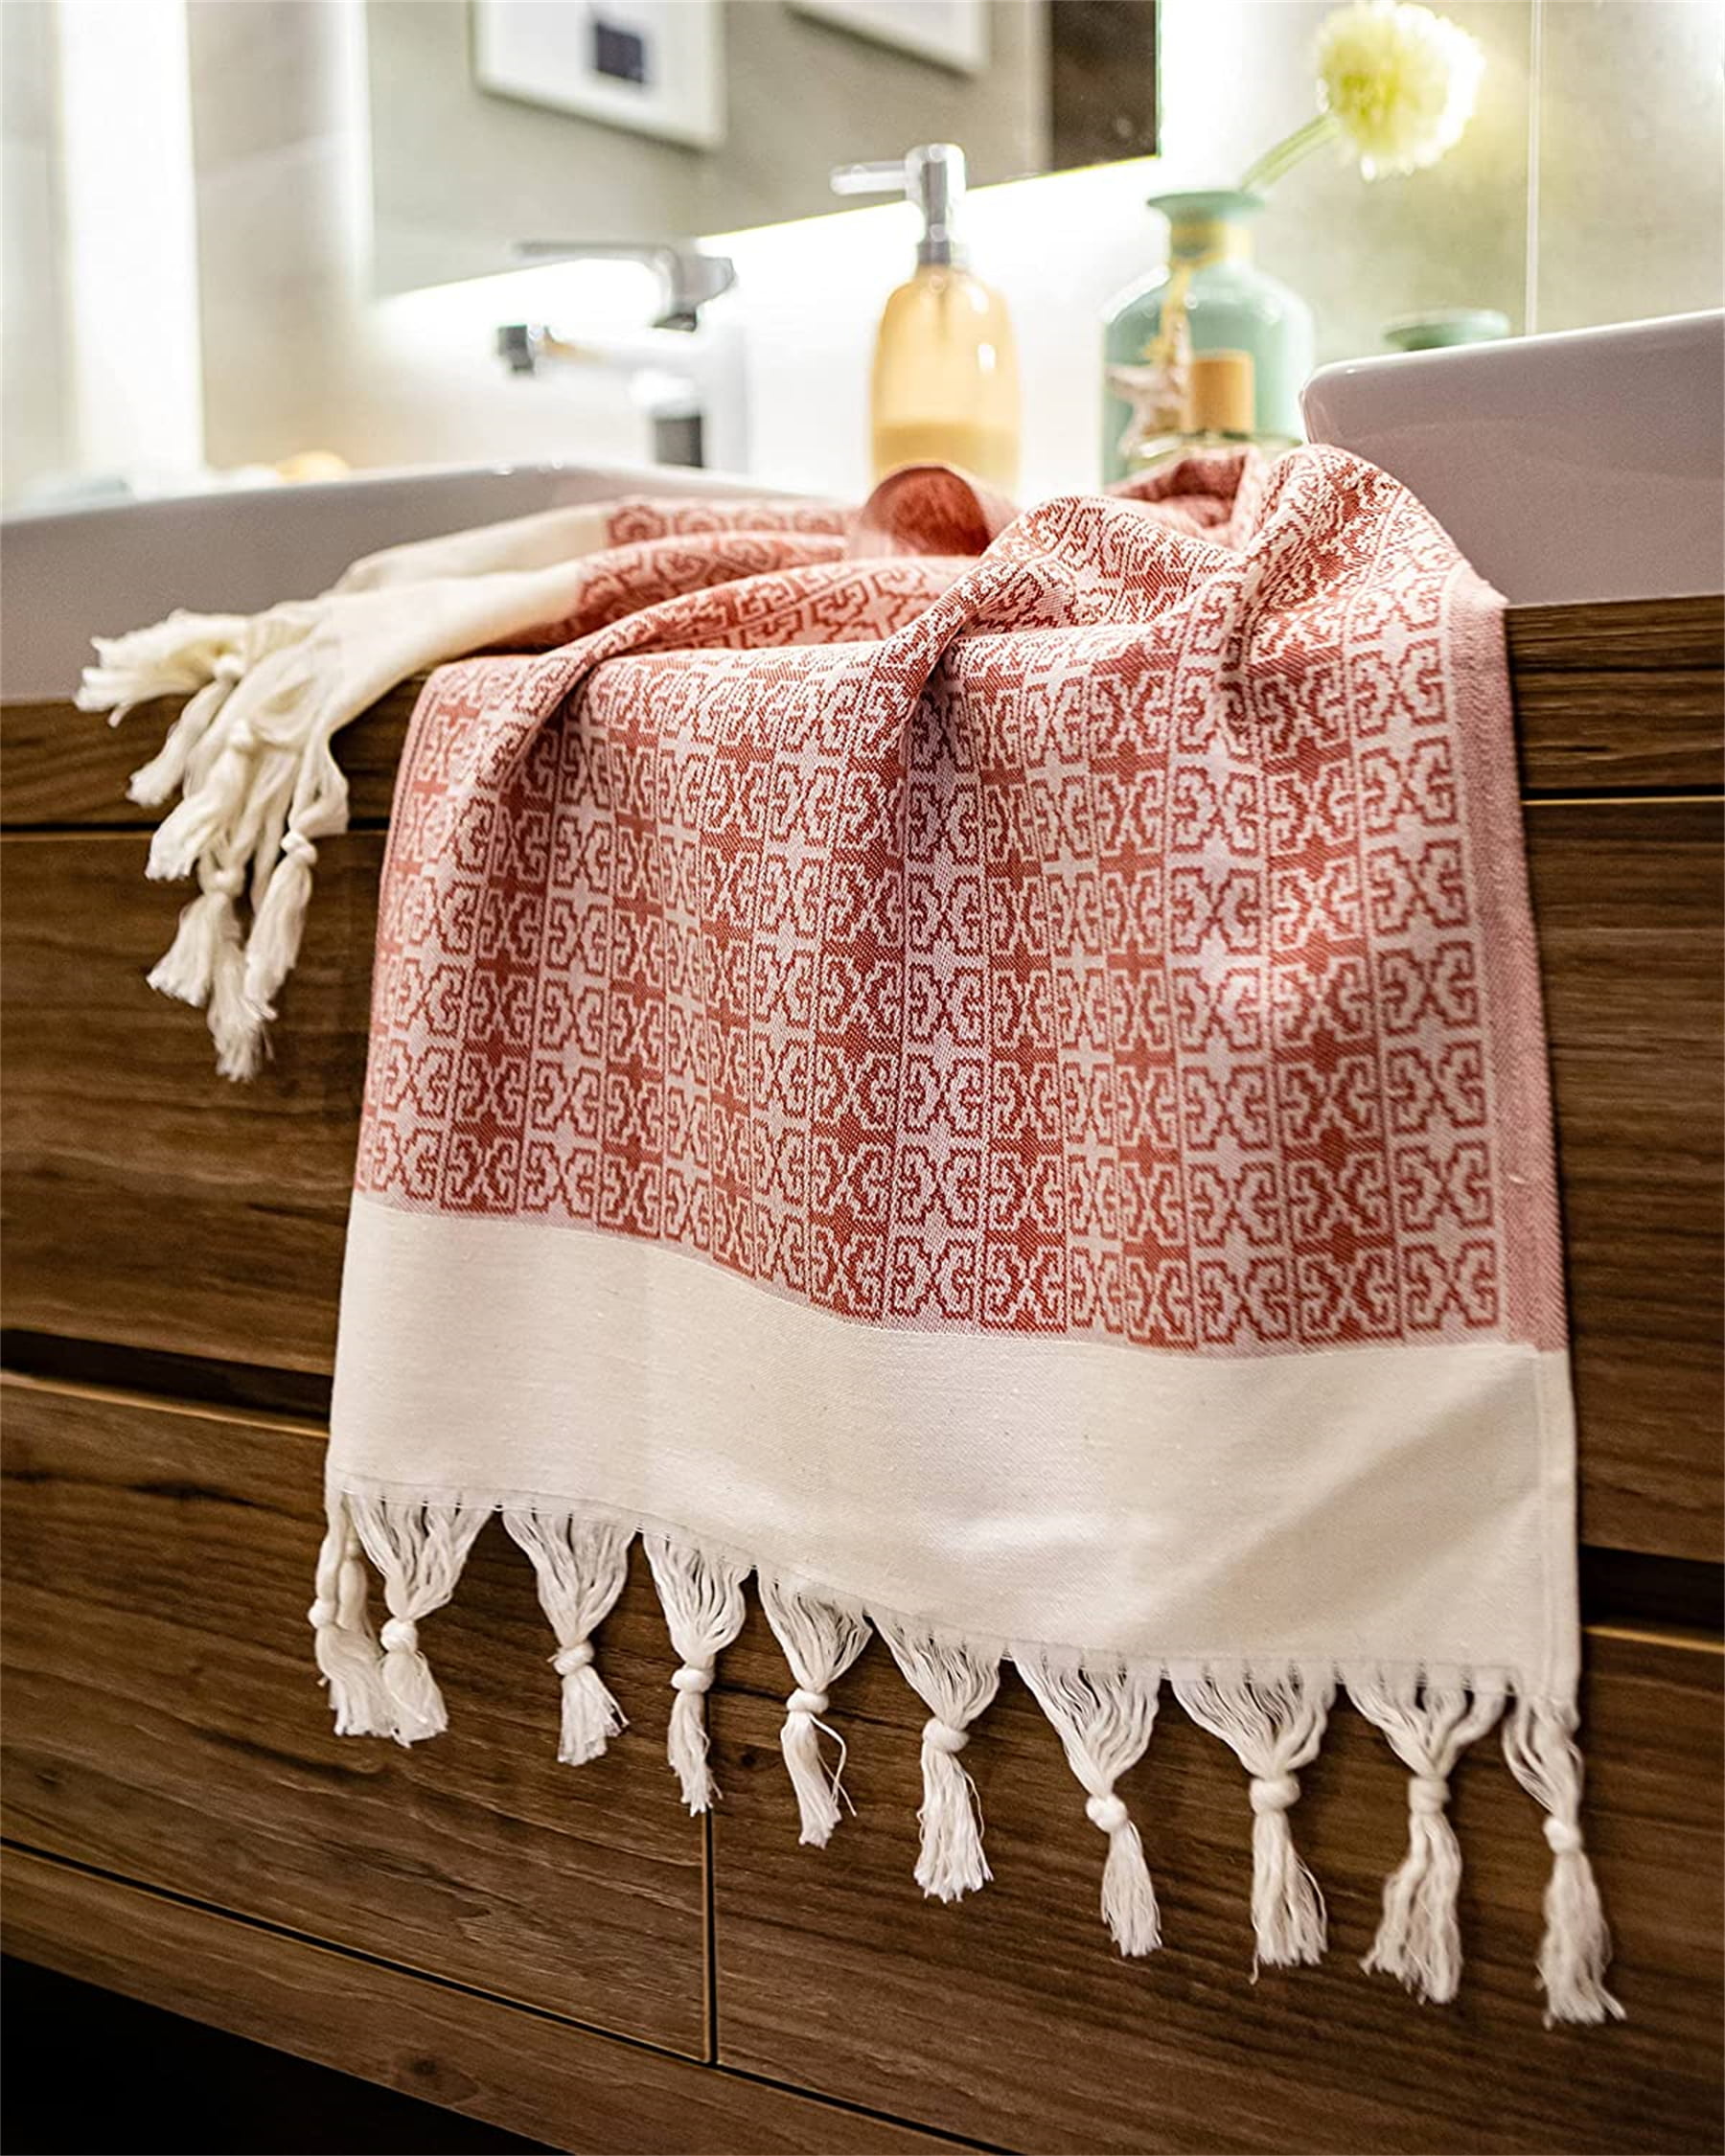 New in box Turkish Hand Towel Set of 2 (19 x 39) Decorative Your